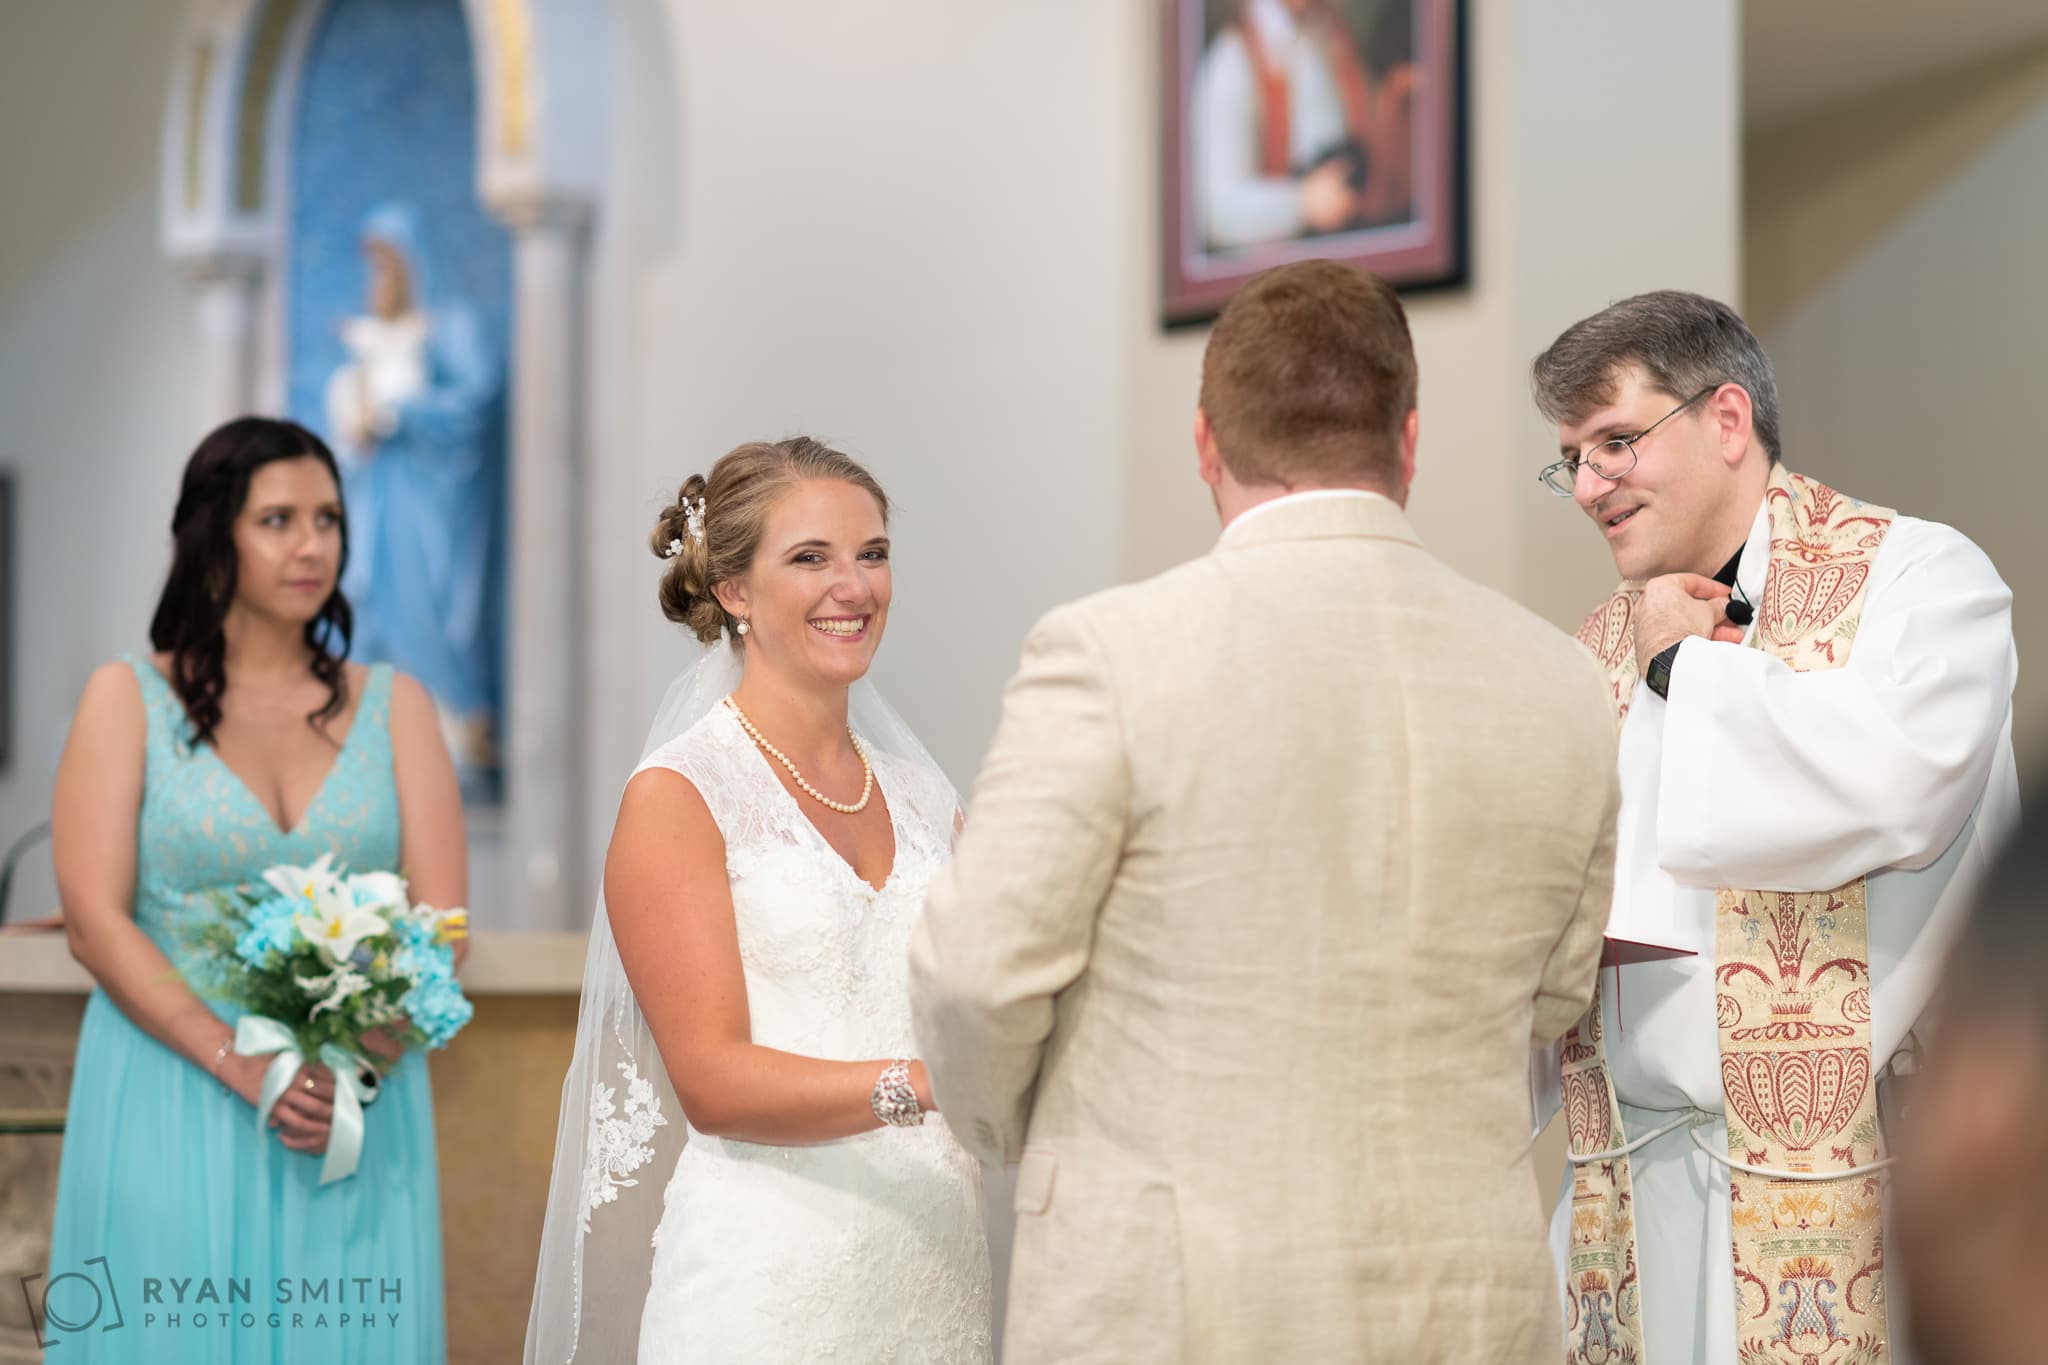 Bride smiling during the ceremony - St. Michael's - Garden City, SC